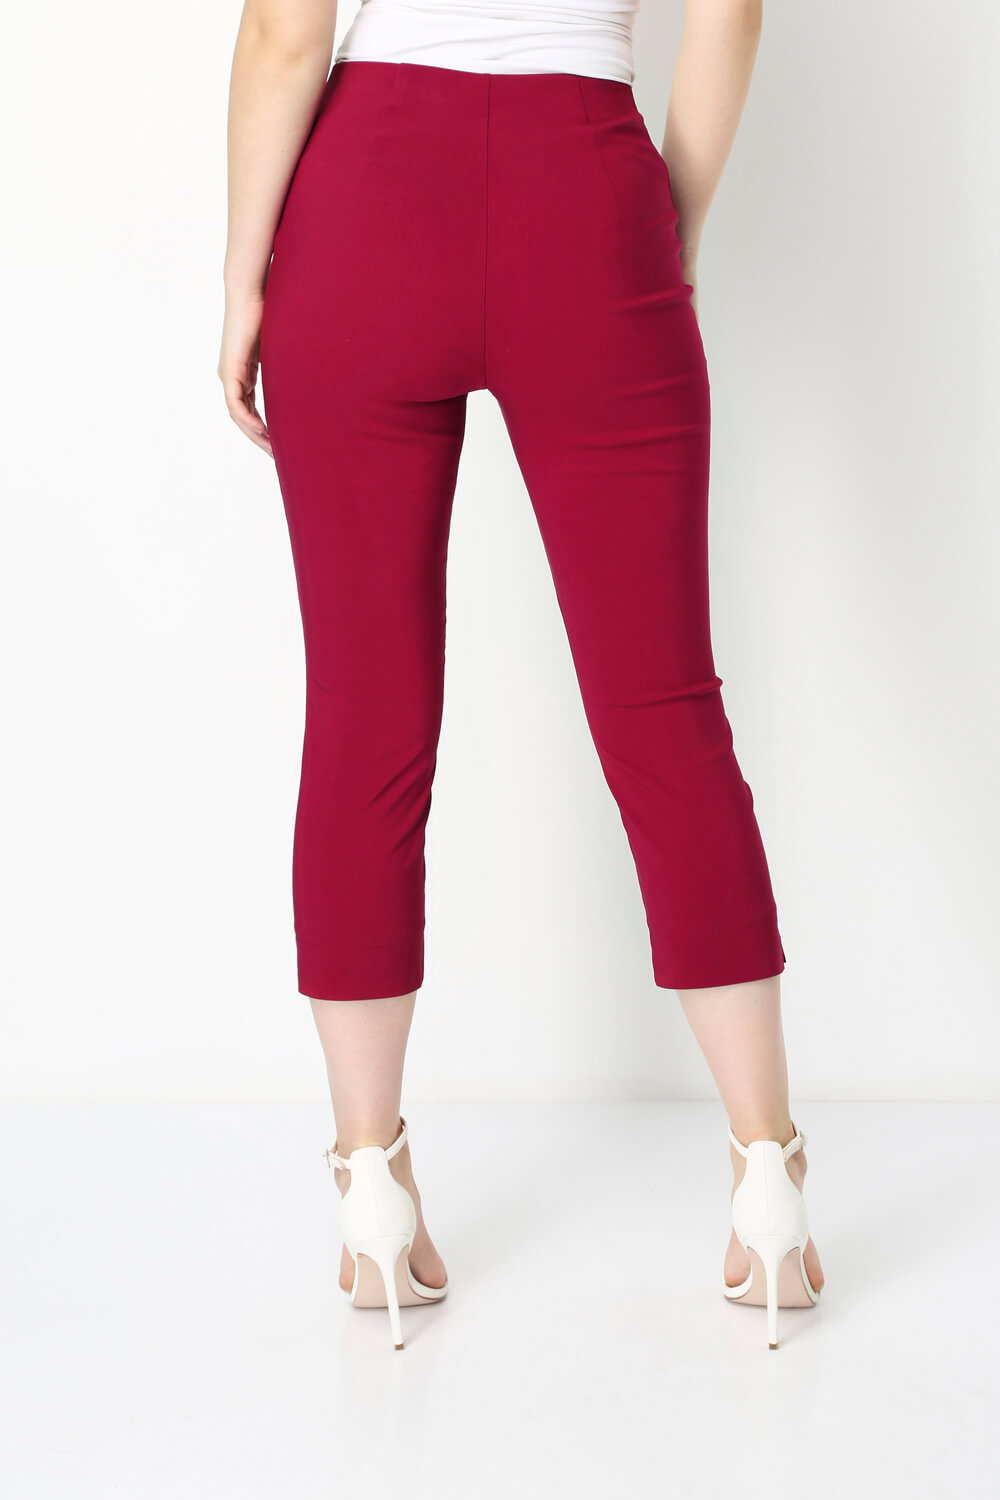 Wine Cropped Stretch Trouser, Image 2 of 6